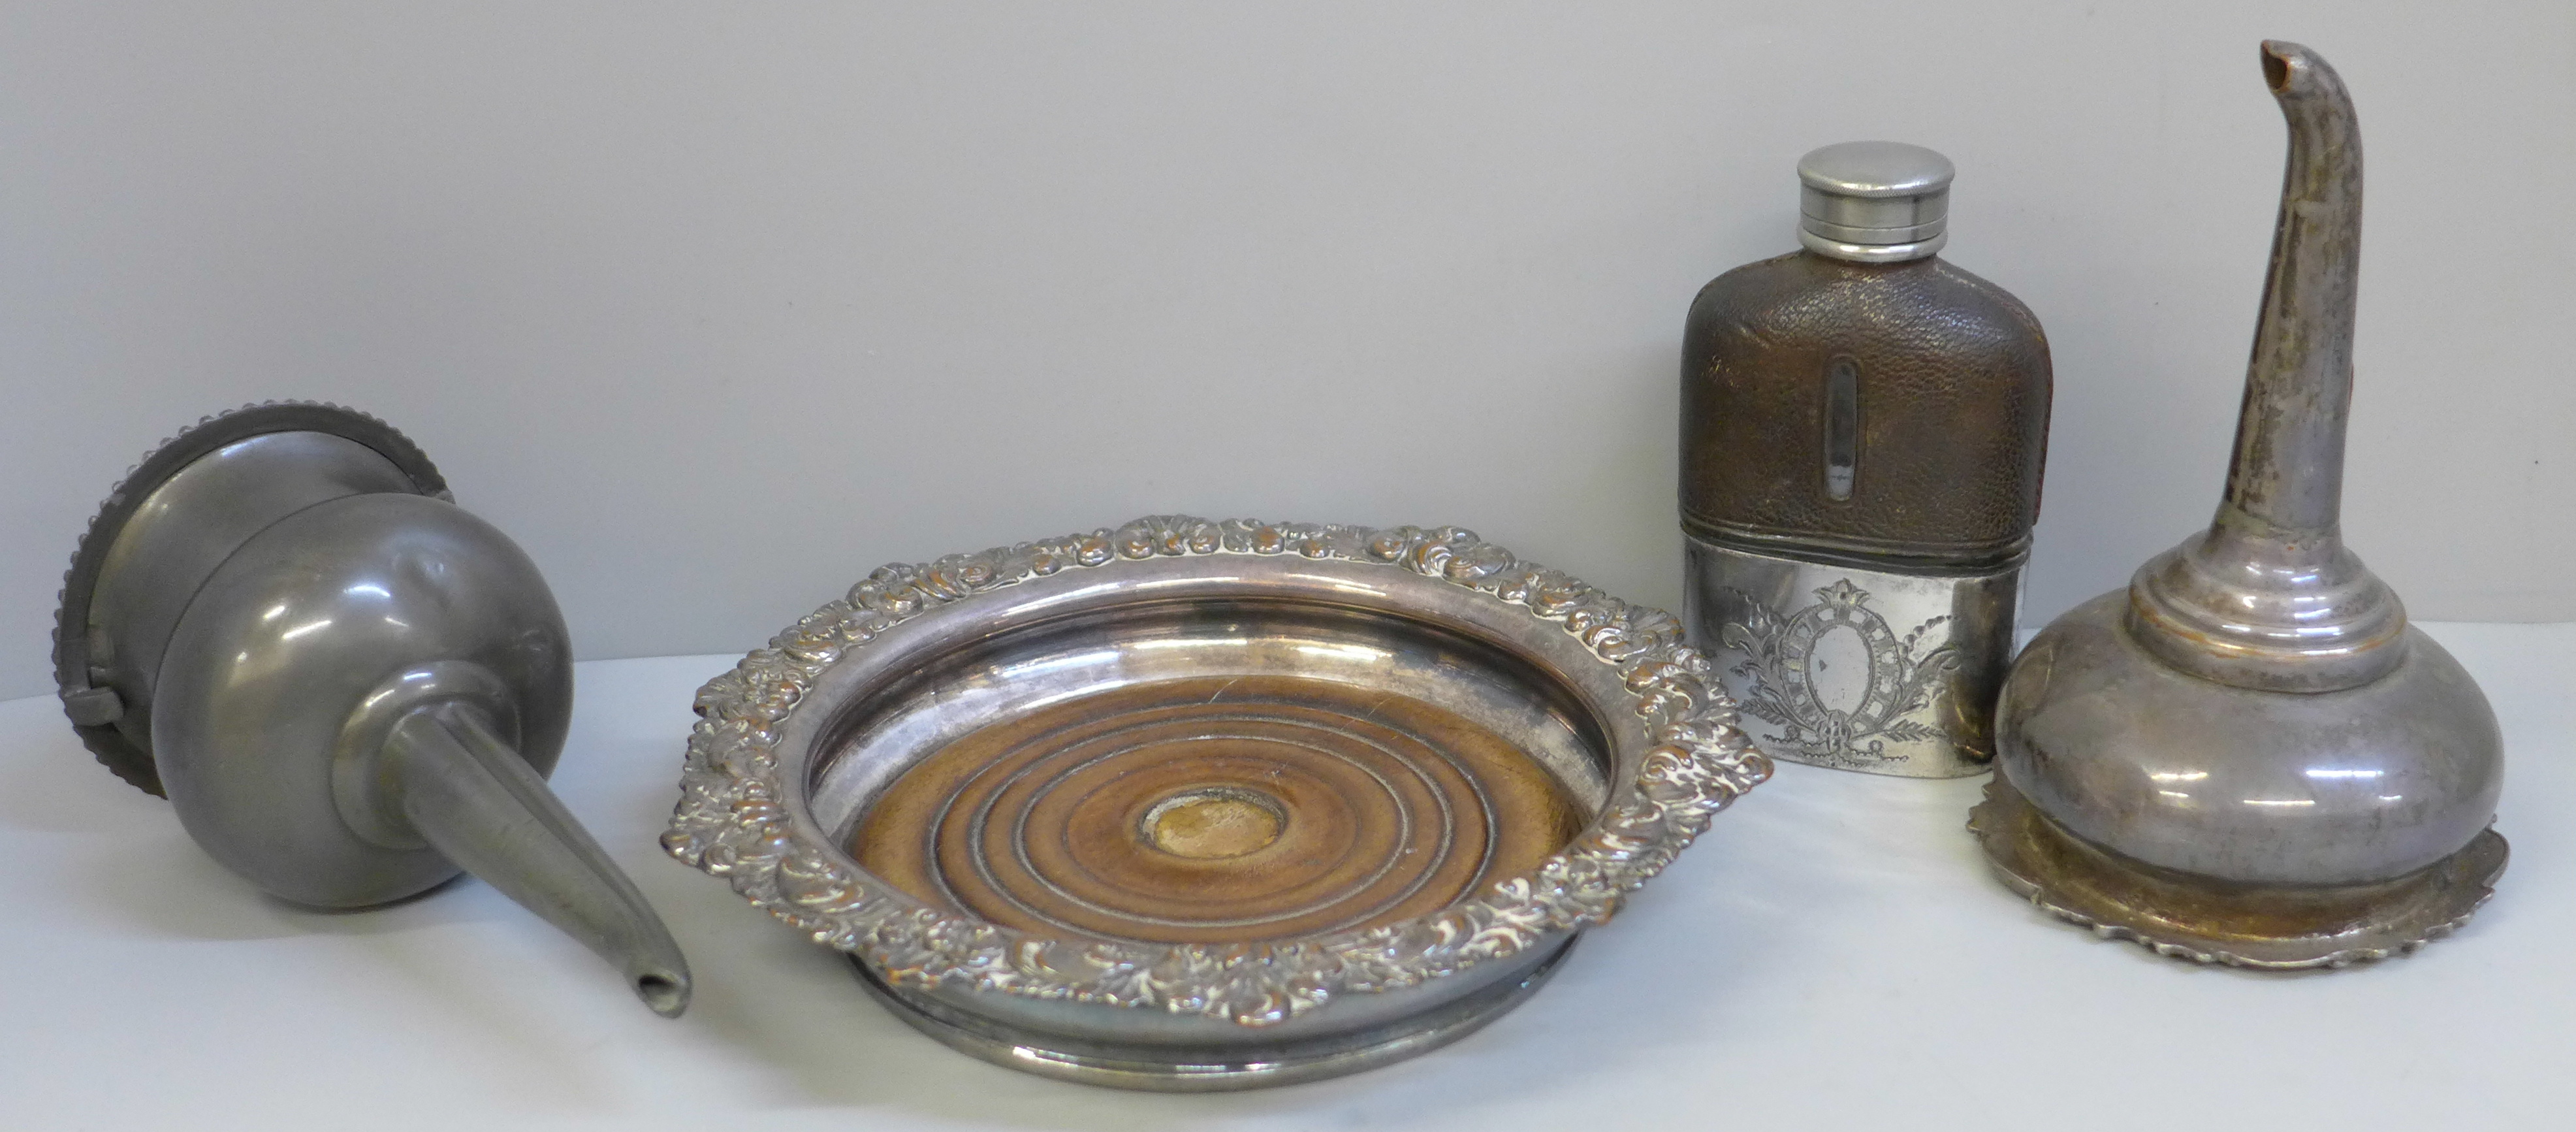 Two early 19th Century wine funnels, a plated wine coaster and a small hip flask